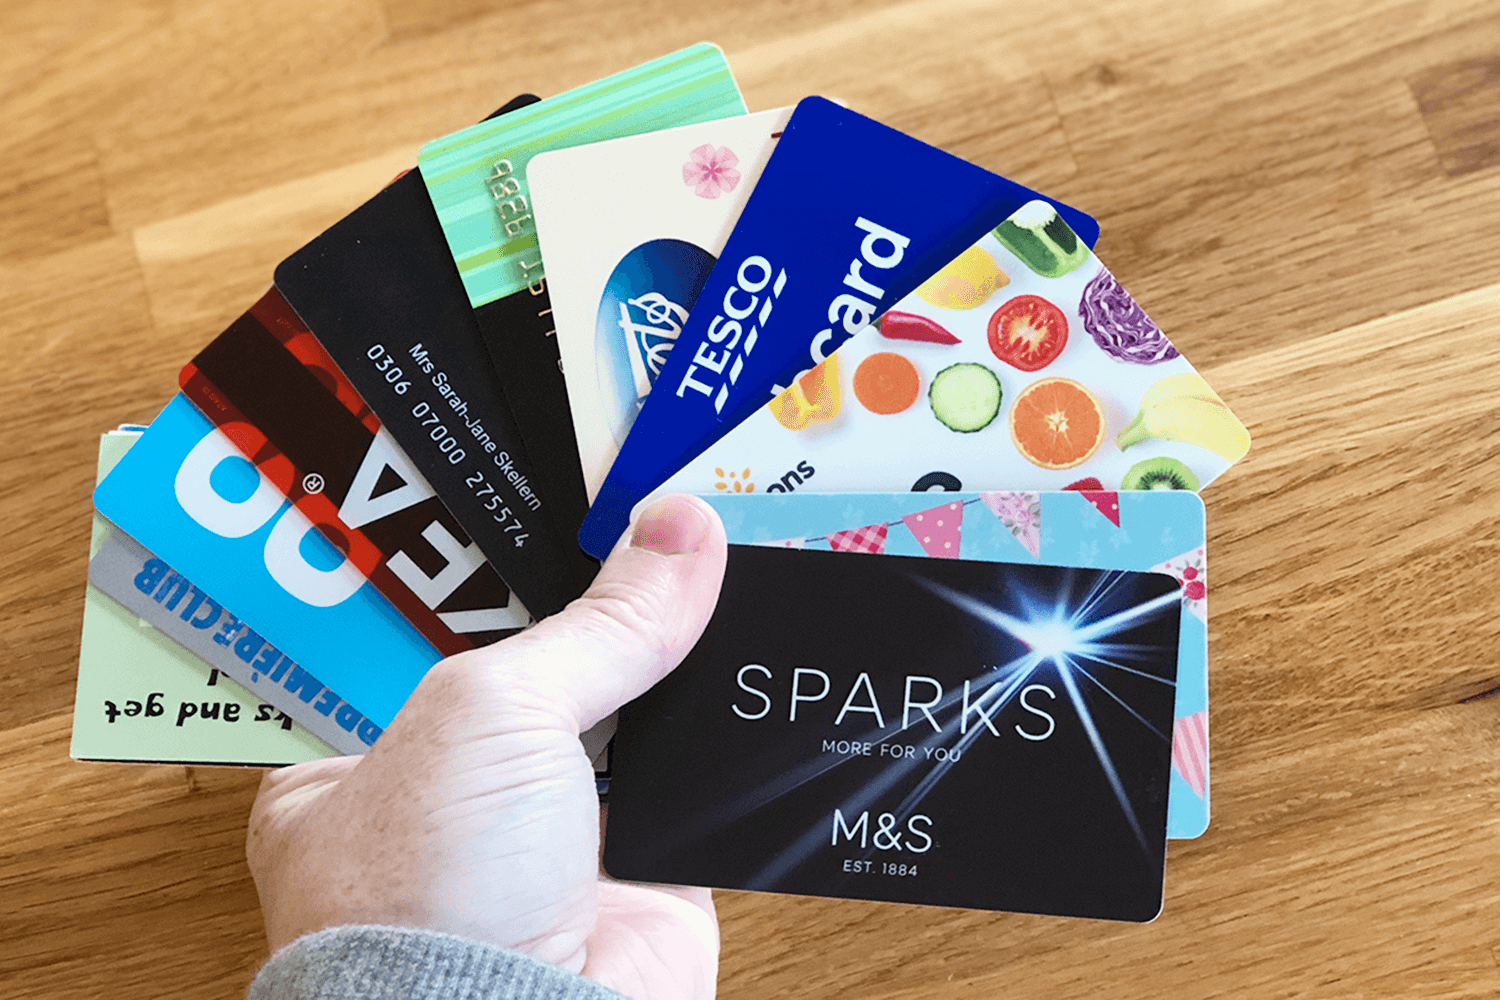 Use loyalty cards to save money